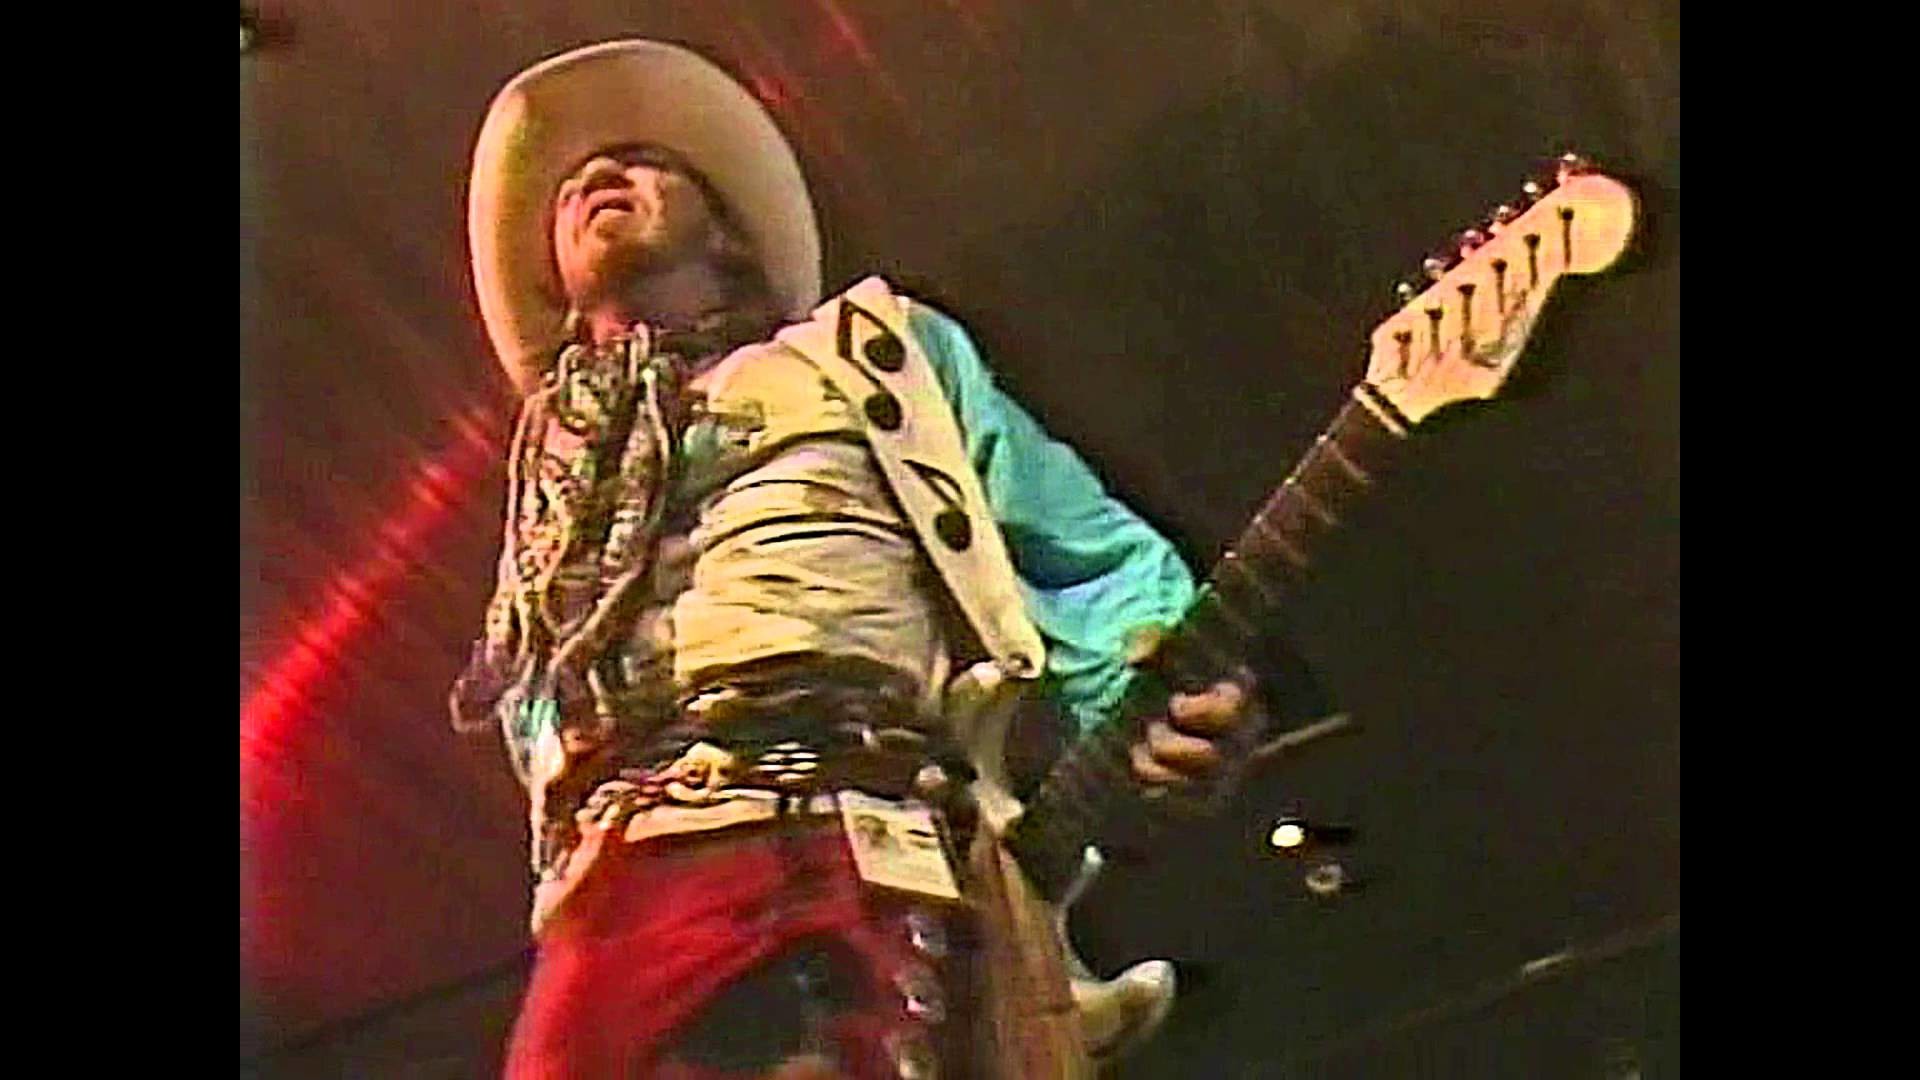 1920x1080 Stevie Ray Vaughan Life Without You Live In Cotton Club 1080P - YouTube